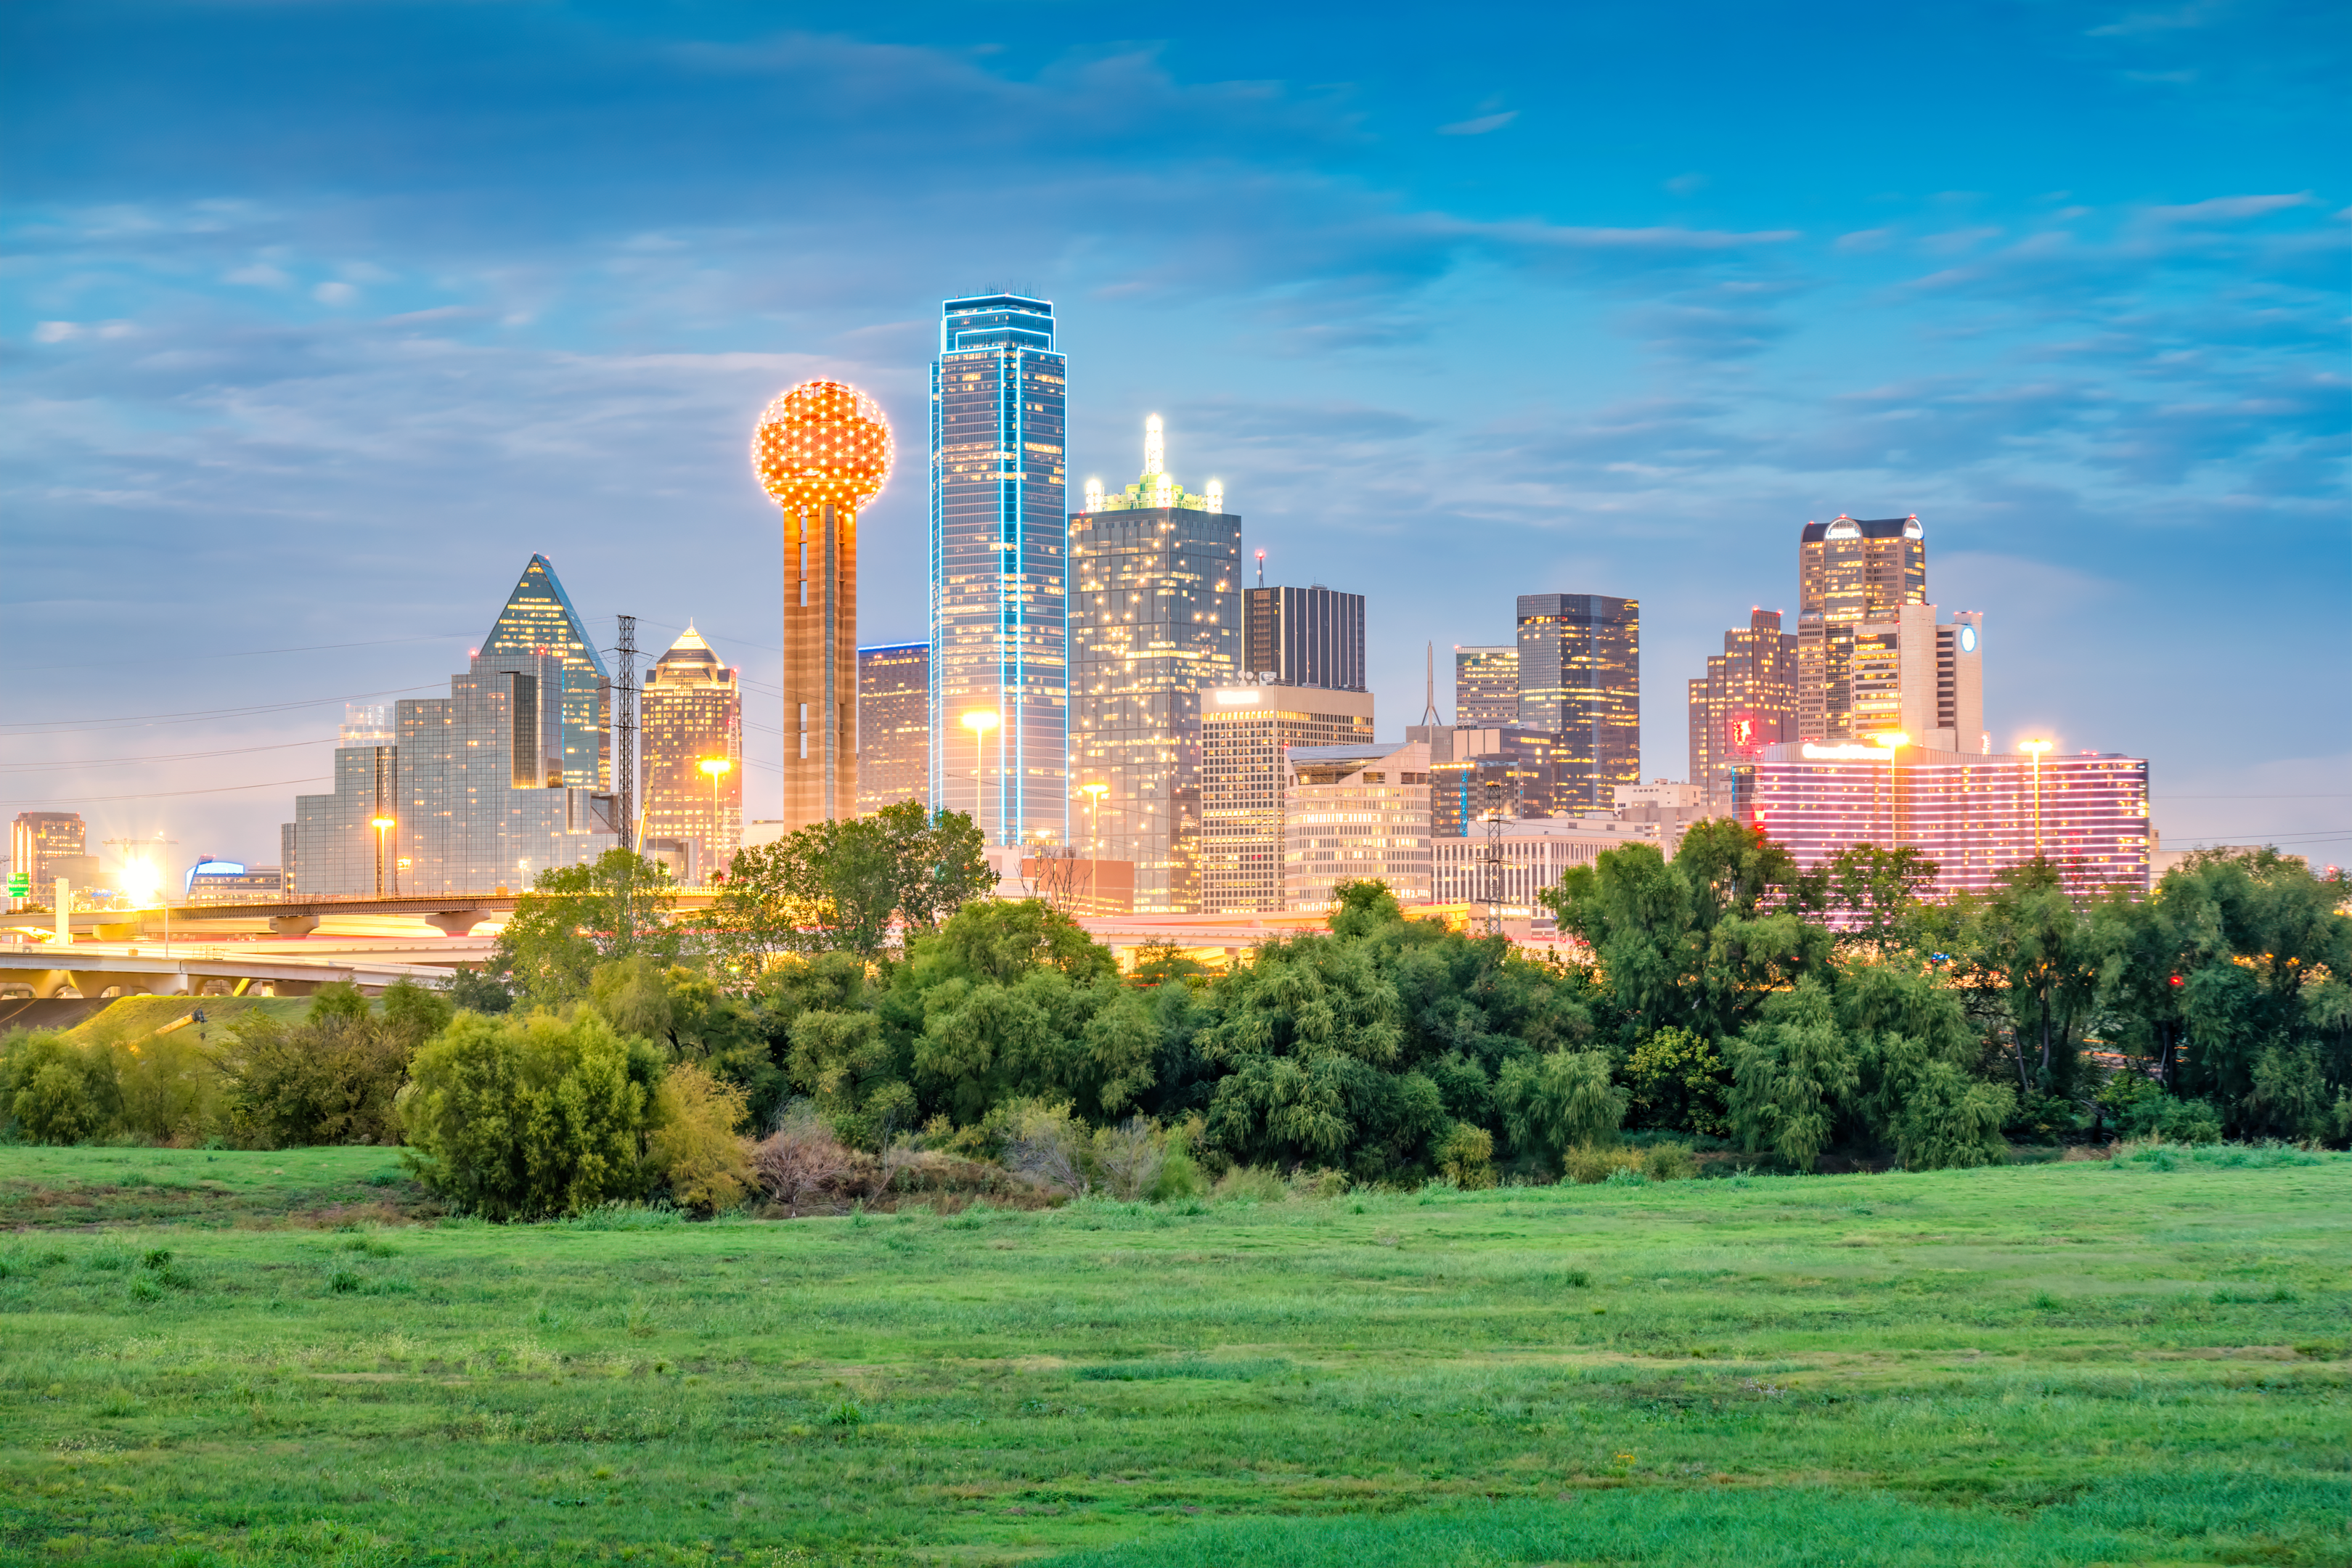 Skyline of downtown Dallas Texas USA with a greenish  park